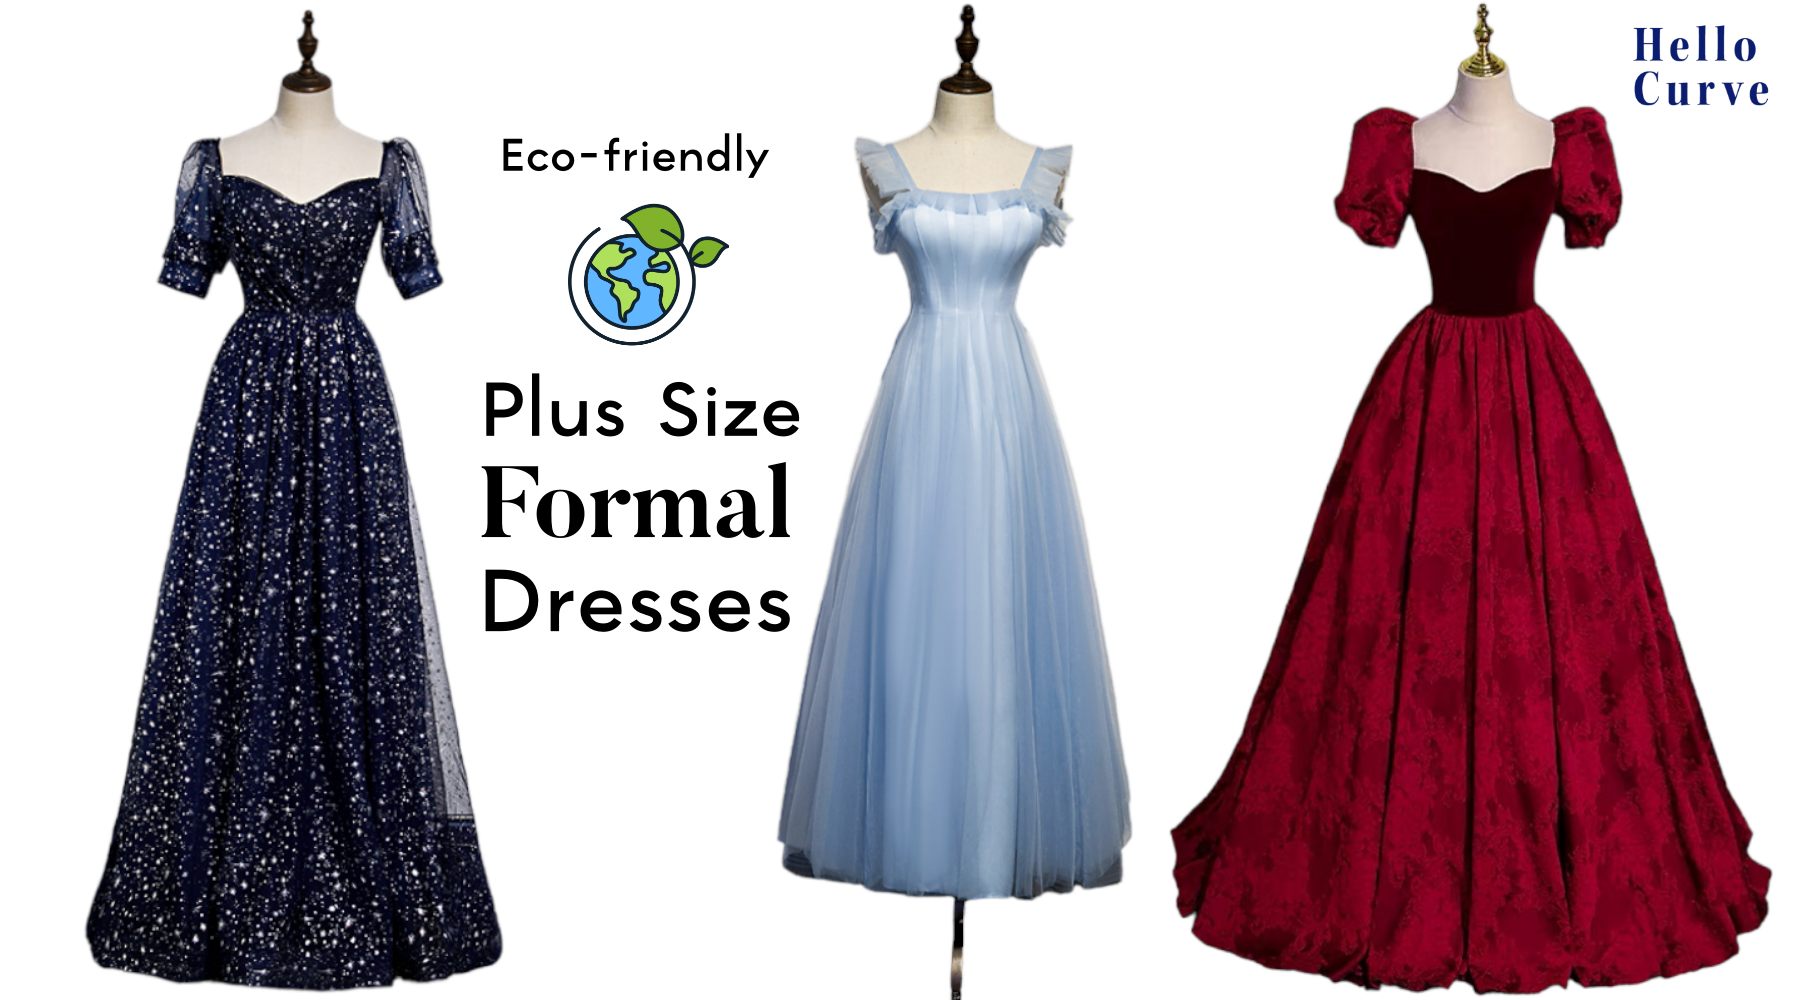 Sustainable Choices: Eco-Friendly Plus Size Formal Dresses